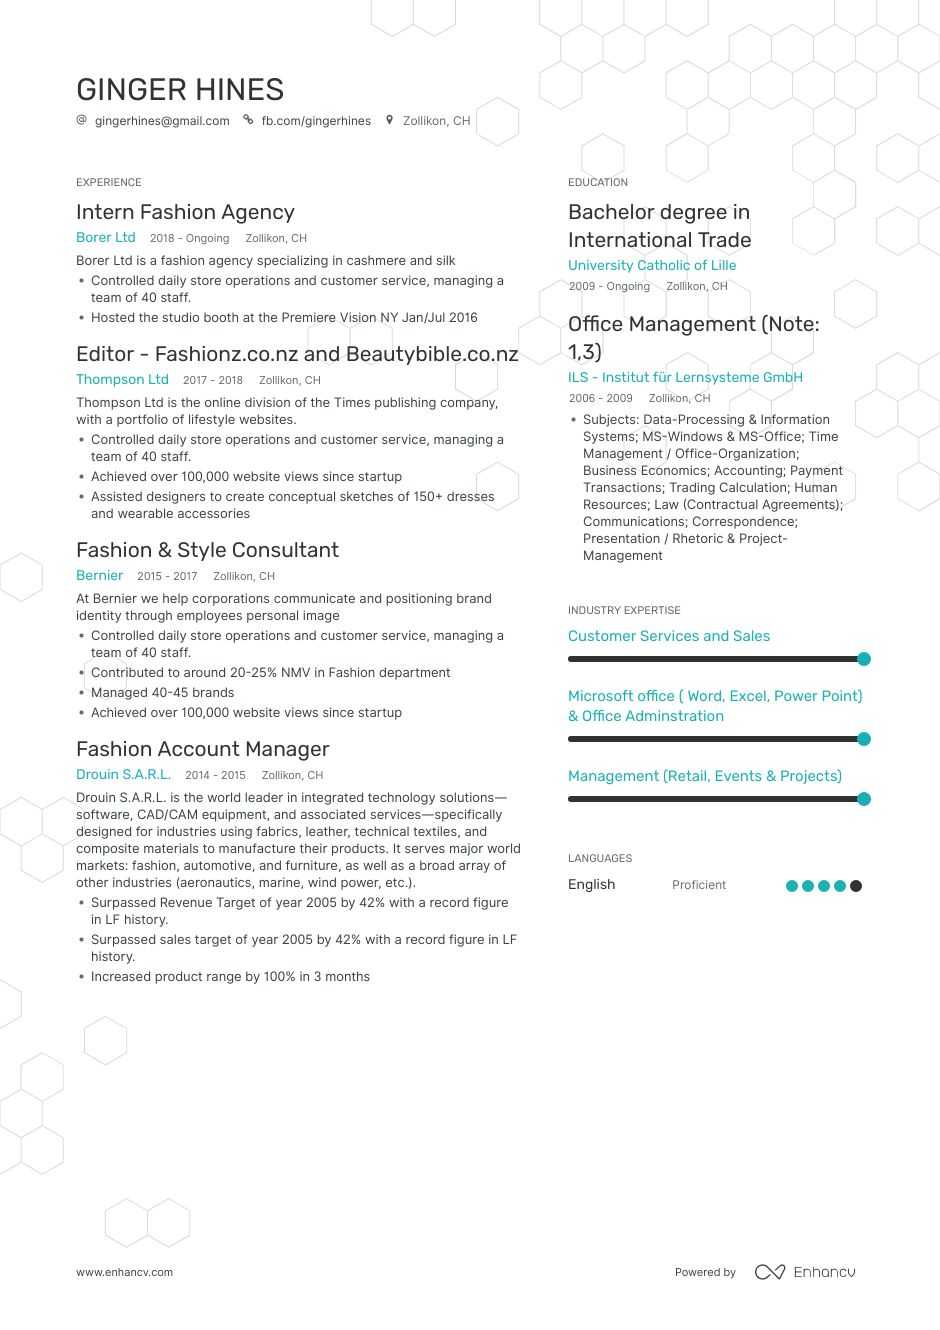 3 More Cool Tools For Nursing Resume Examples